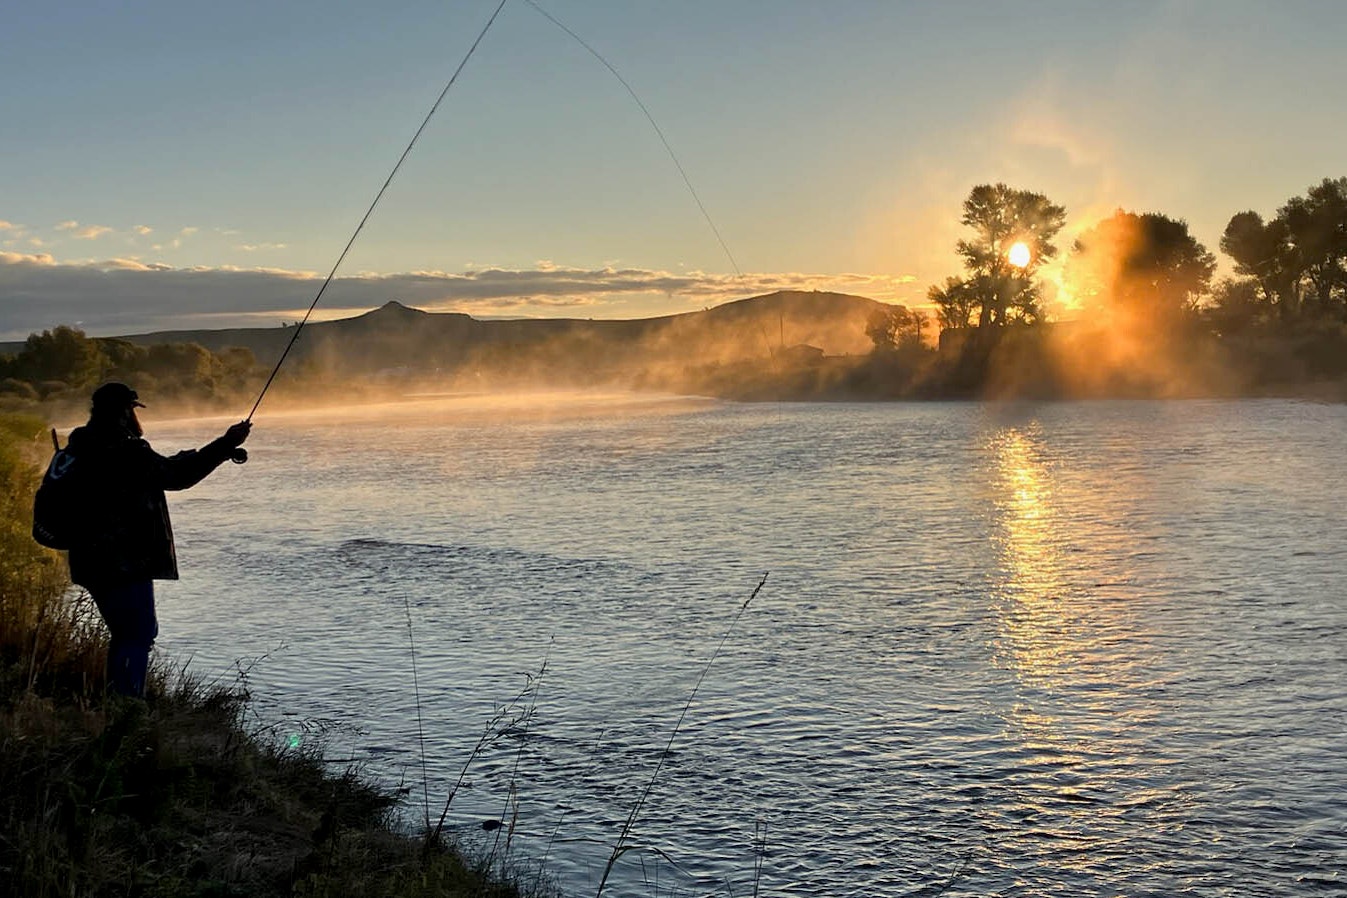 Fishing on the Green River at sunrise near Big Piney, Wyoming on Sept. 23, 2023.